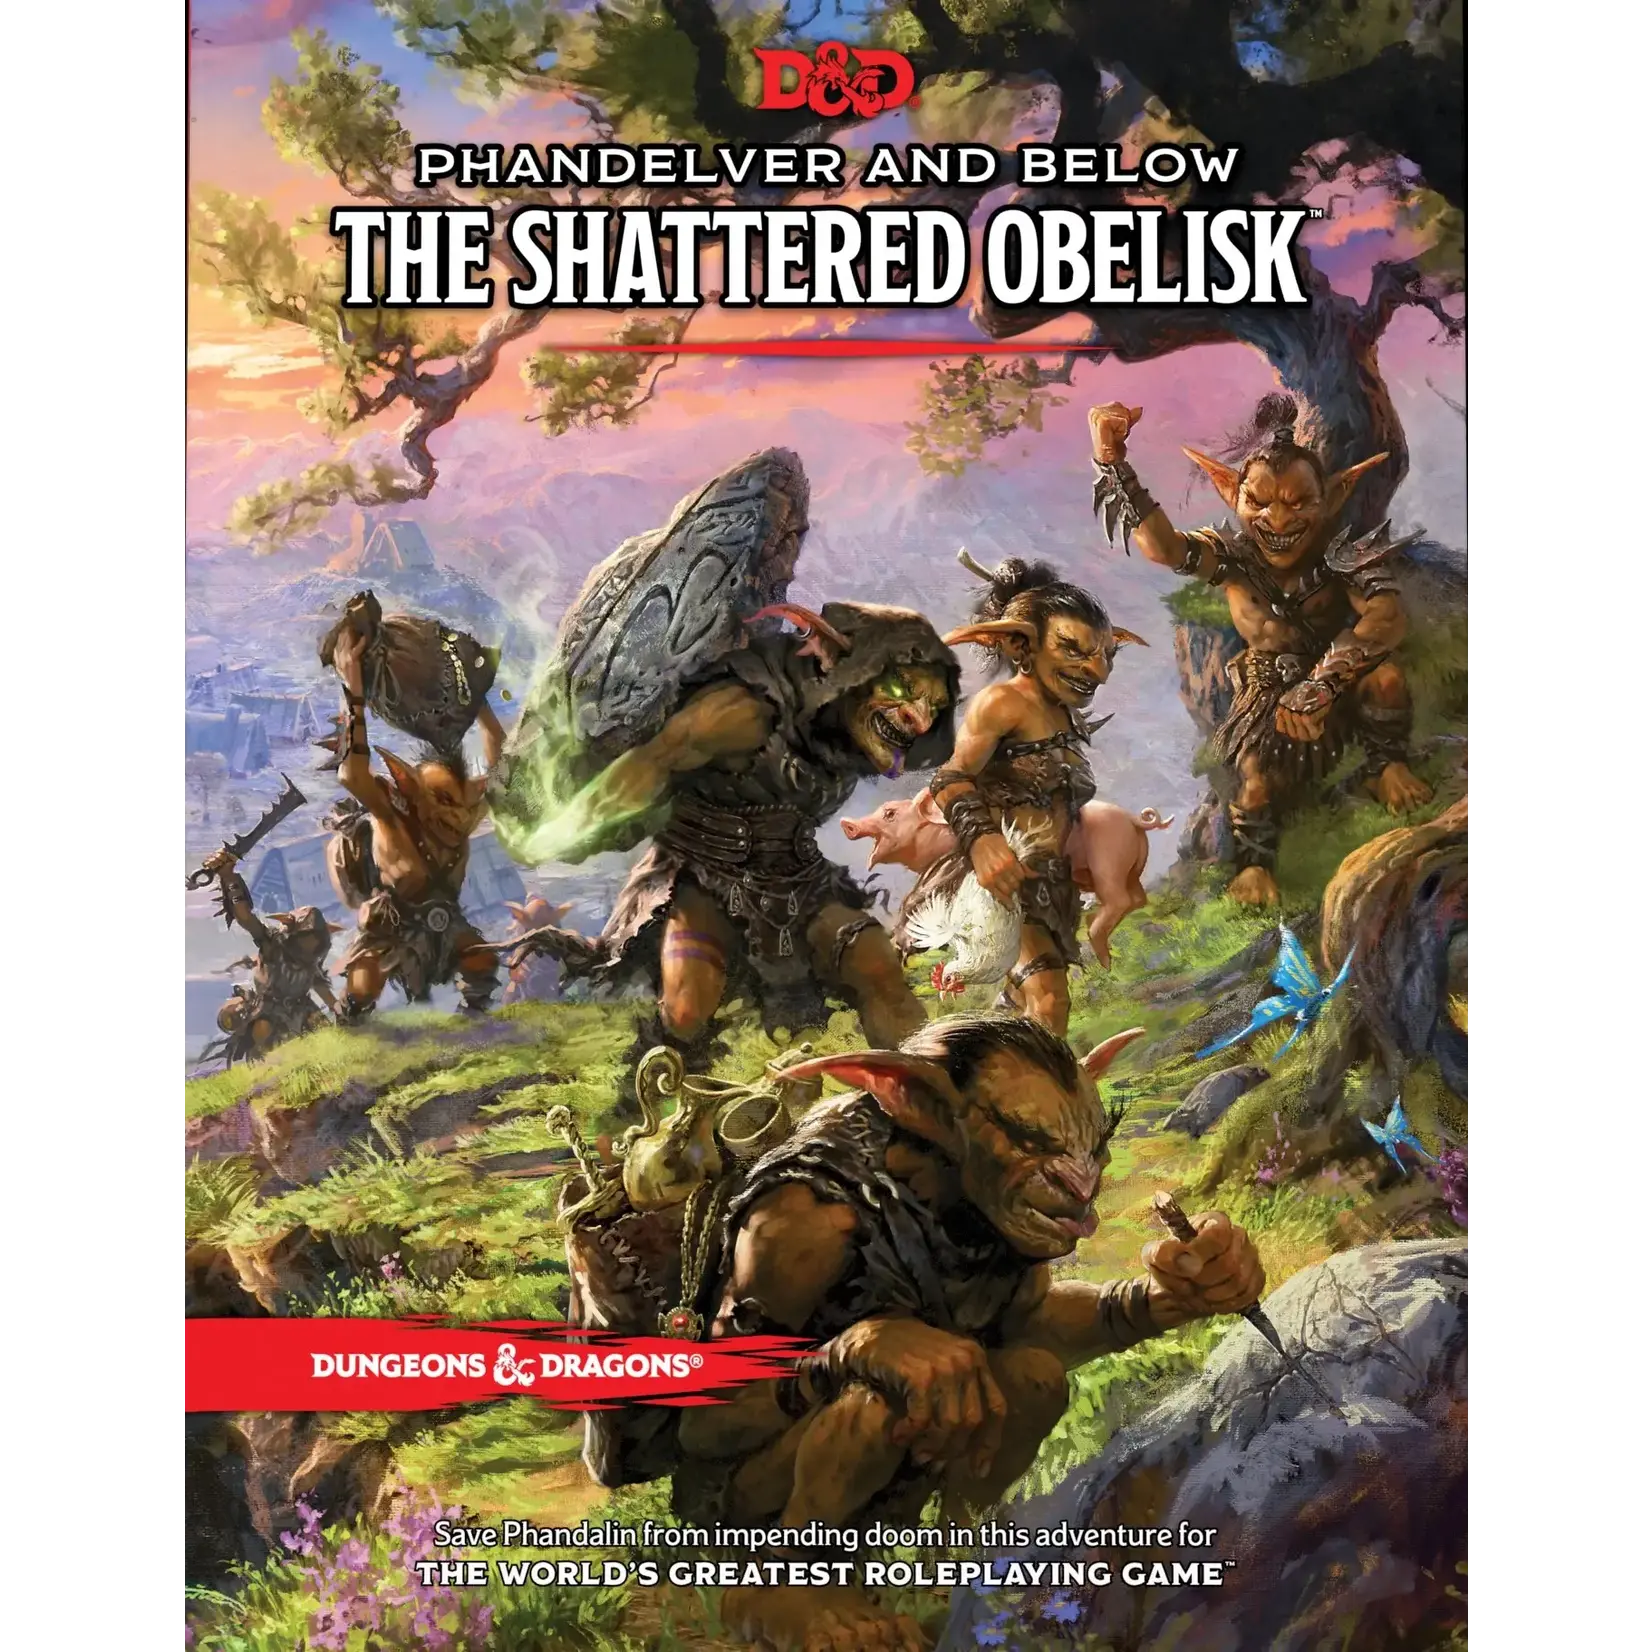 Dungeons & Dragons Dungeons & Dragons - Phandelver and Below: the Shattered Obelisk (5th Edition)